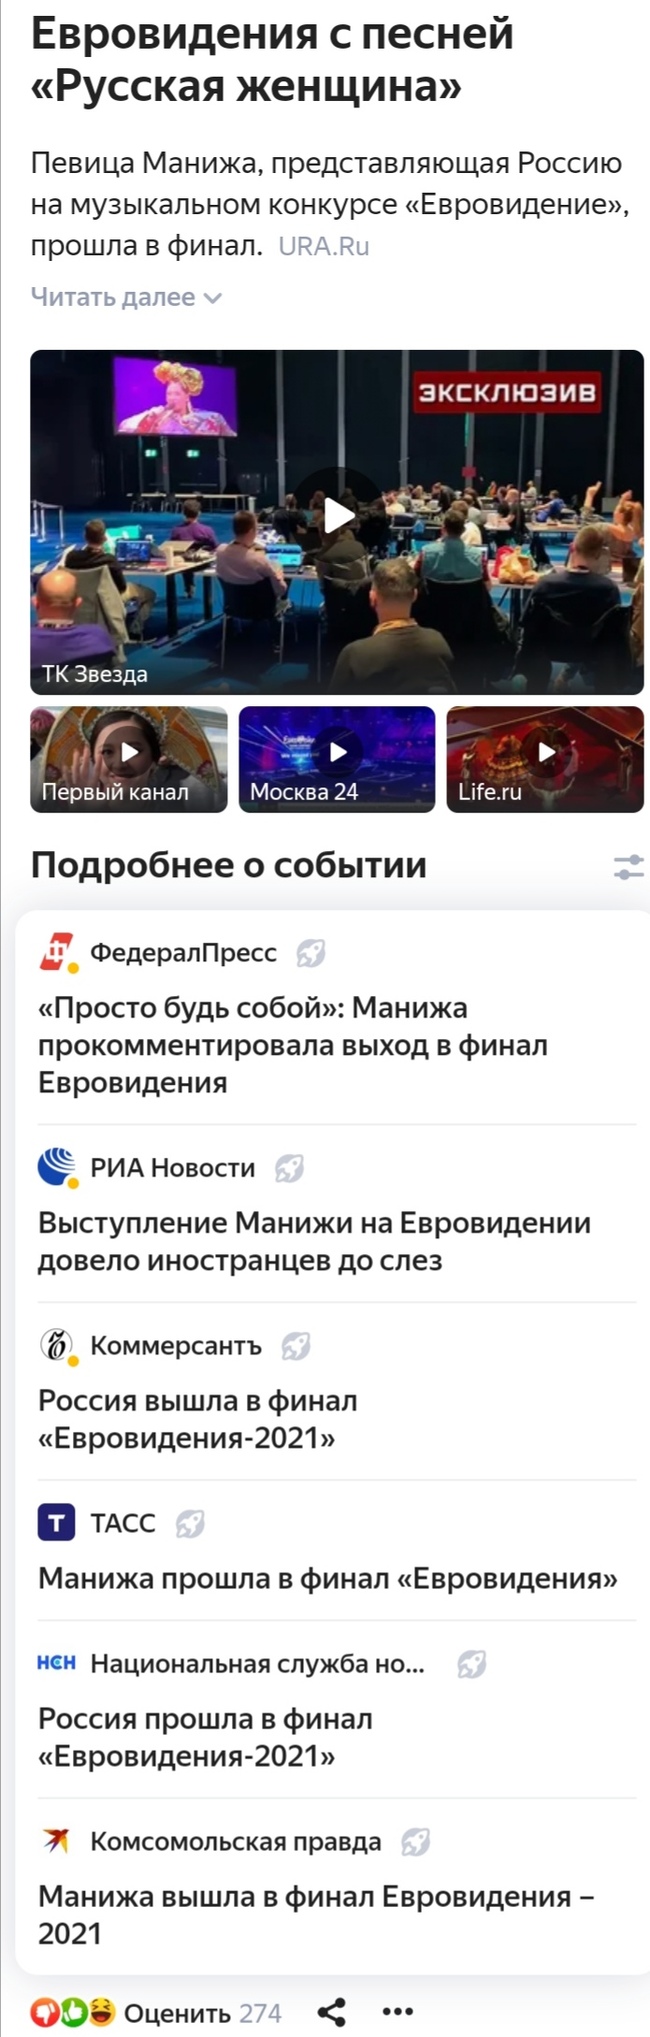 Maybe they'll take her? - Screenshot, news, Eurovision, , Manizha, A shame, Russia, Idiocy, , Mat, Longpost